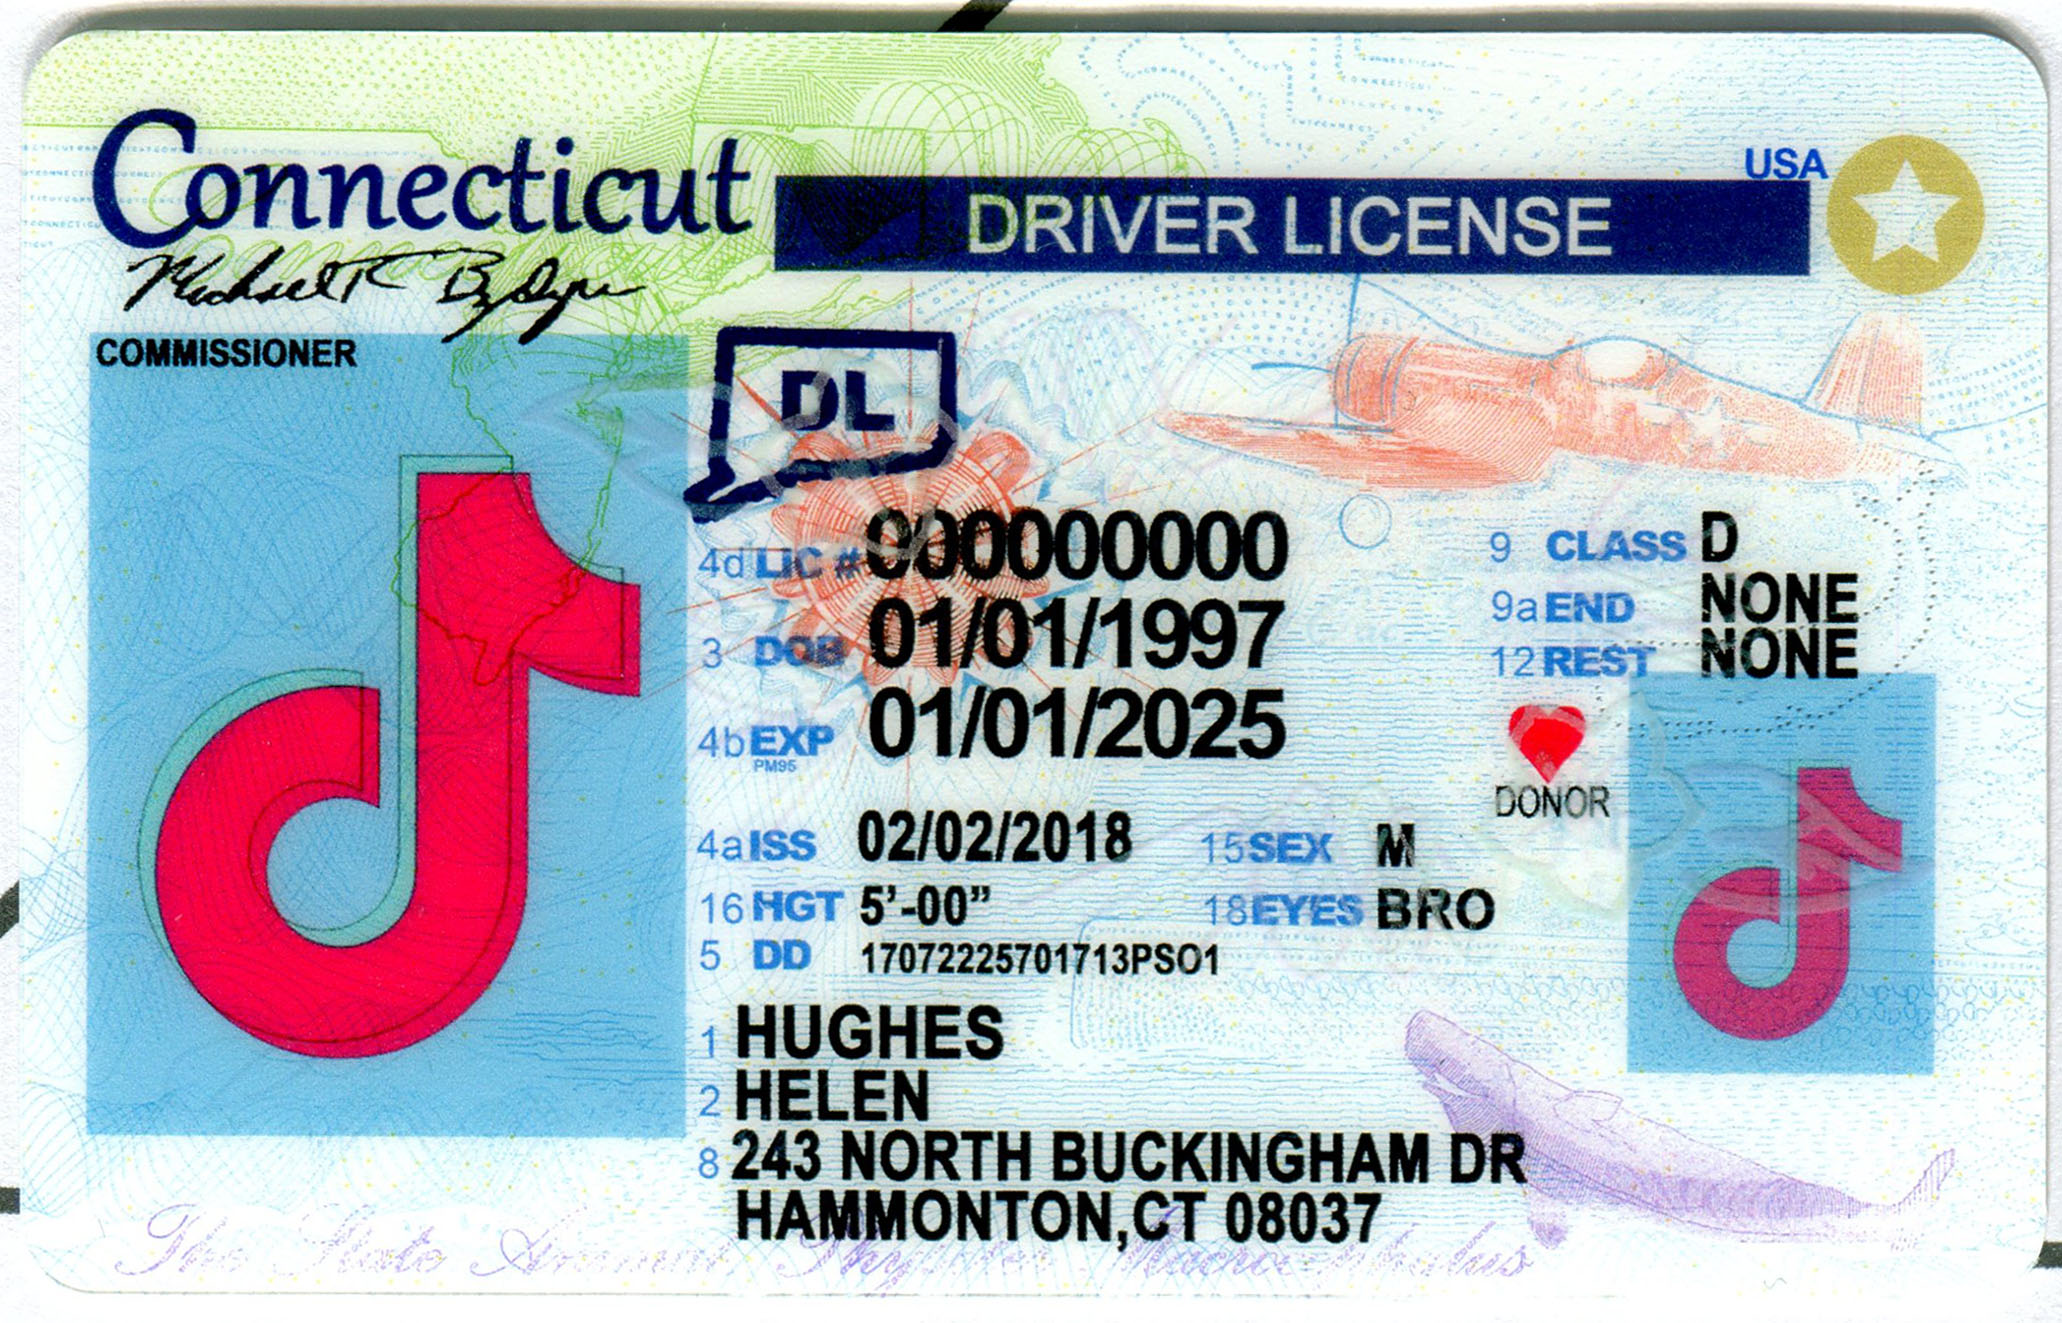 Connecticut-New fake id